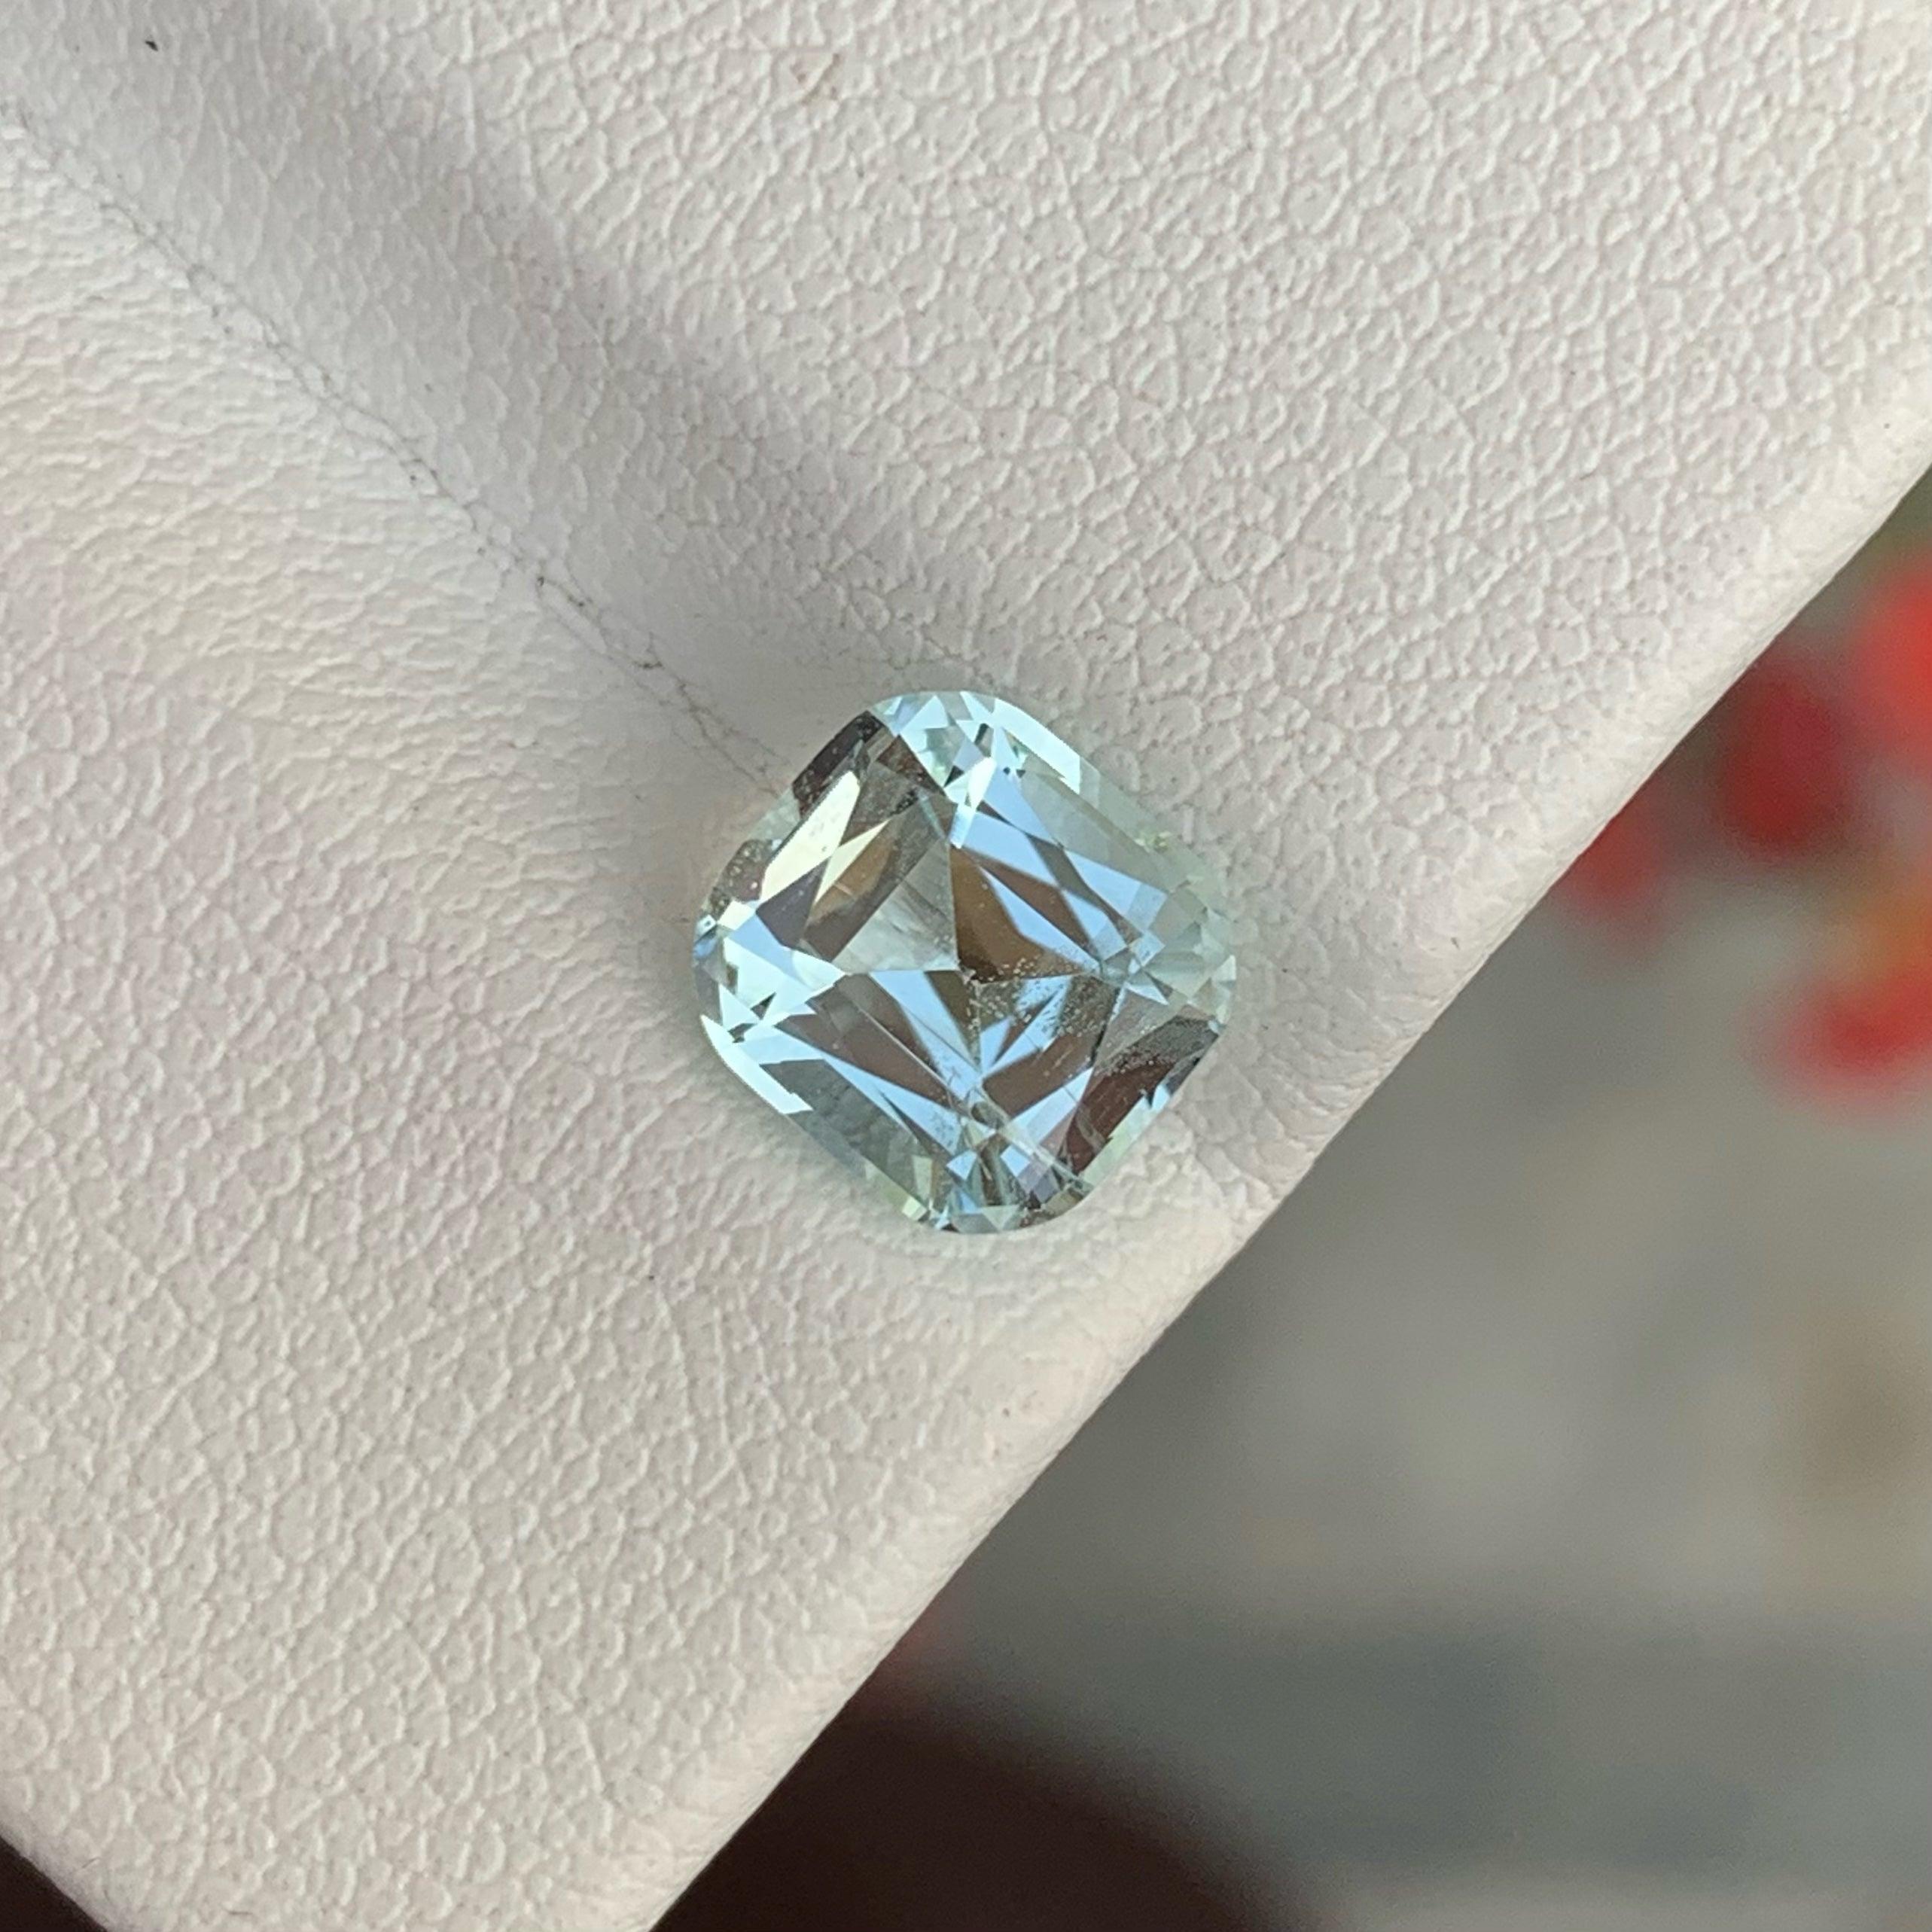 Spectacular Natural Cut Aquamarine Gemstone, available for sale at wholesale price natural high quality 1.85 Carats VVS Clarity Loose Aquamarine from Pakistan.

Product Information:
GEMSTONE NAME: Spectacular Natural Cut Aquamarine